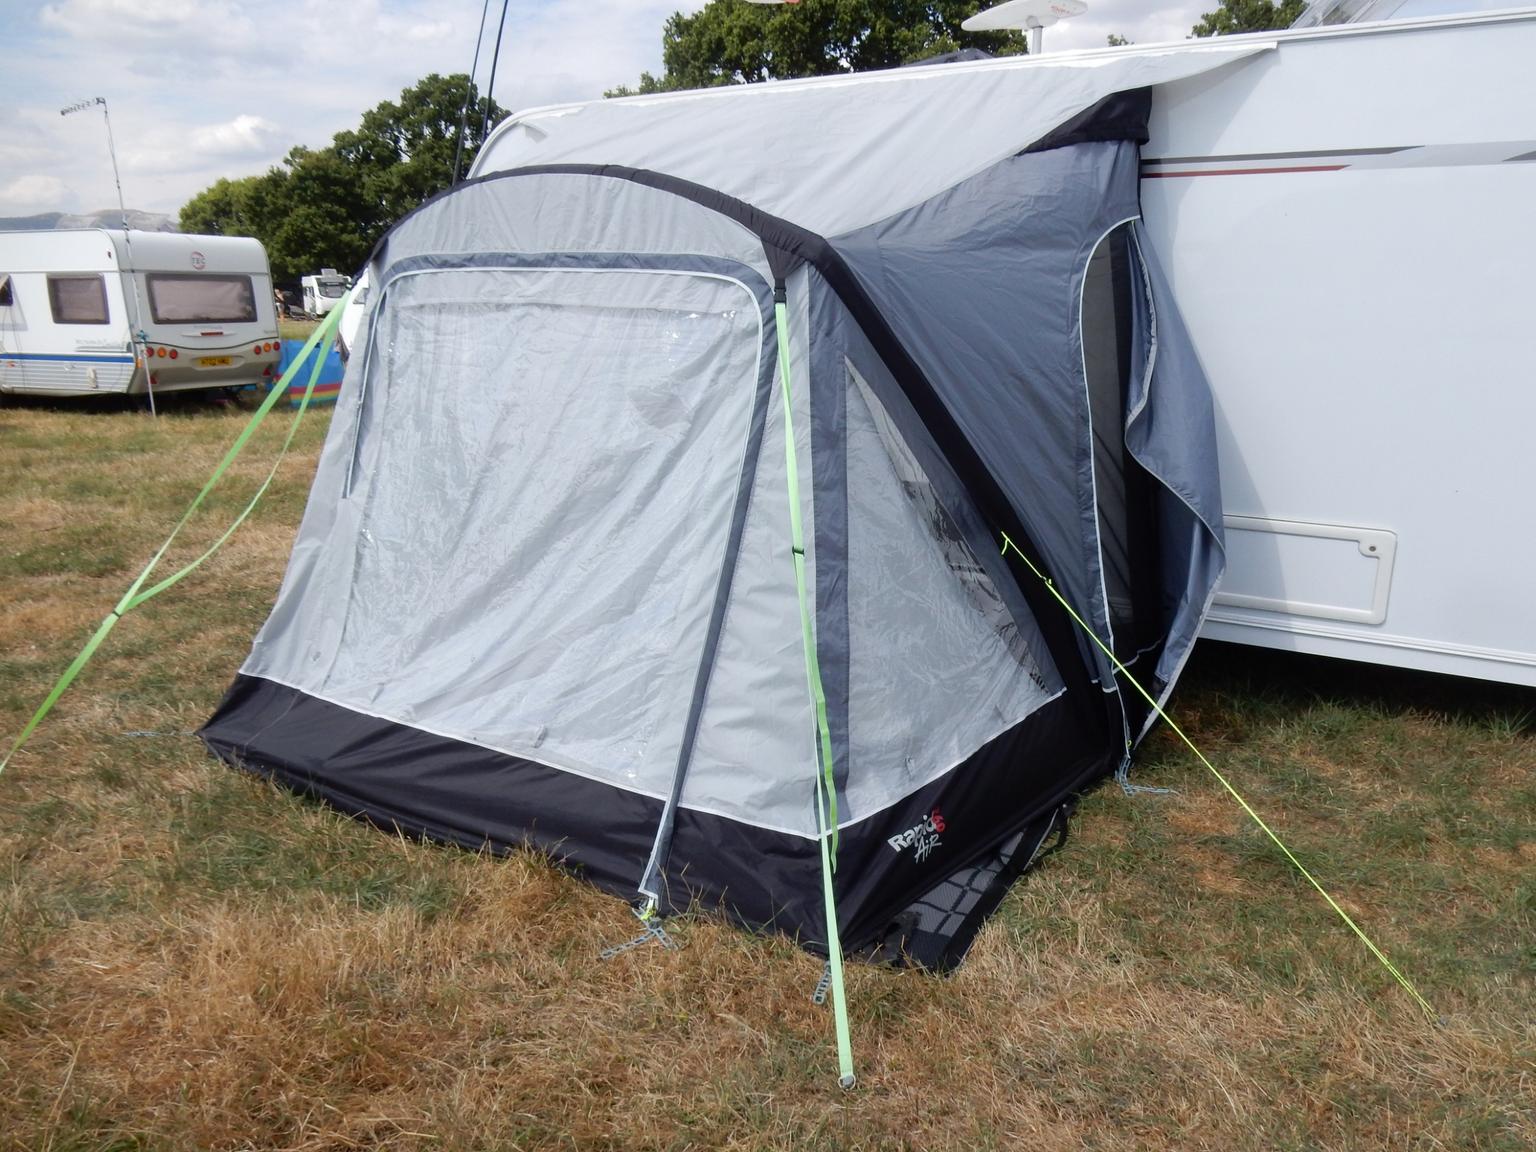 Kampa Rapid Air 260 Porch Awning in StokeonTrent for £75.00 for sale Shpock